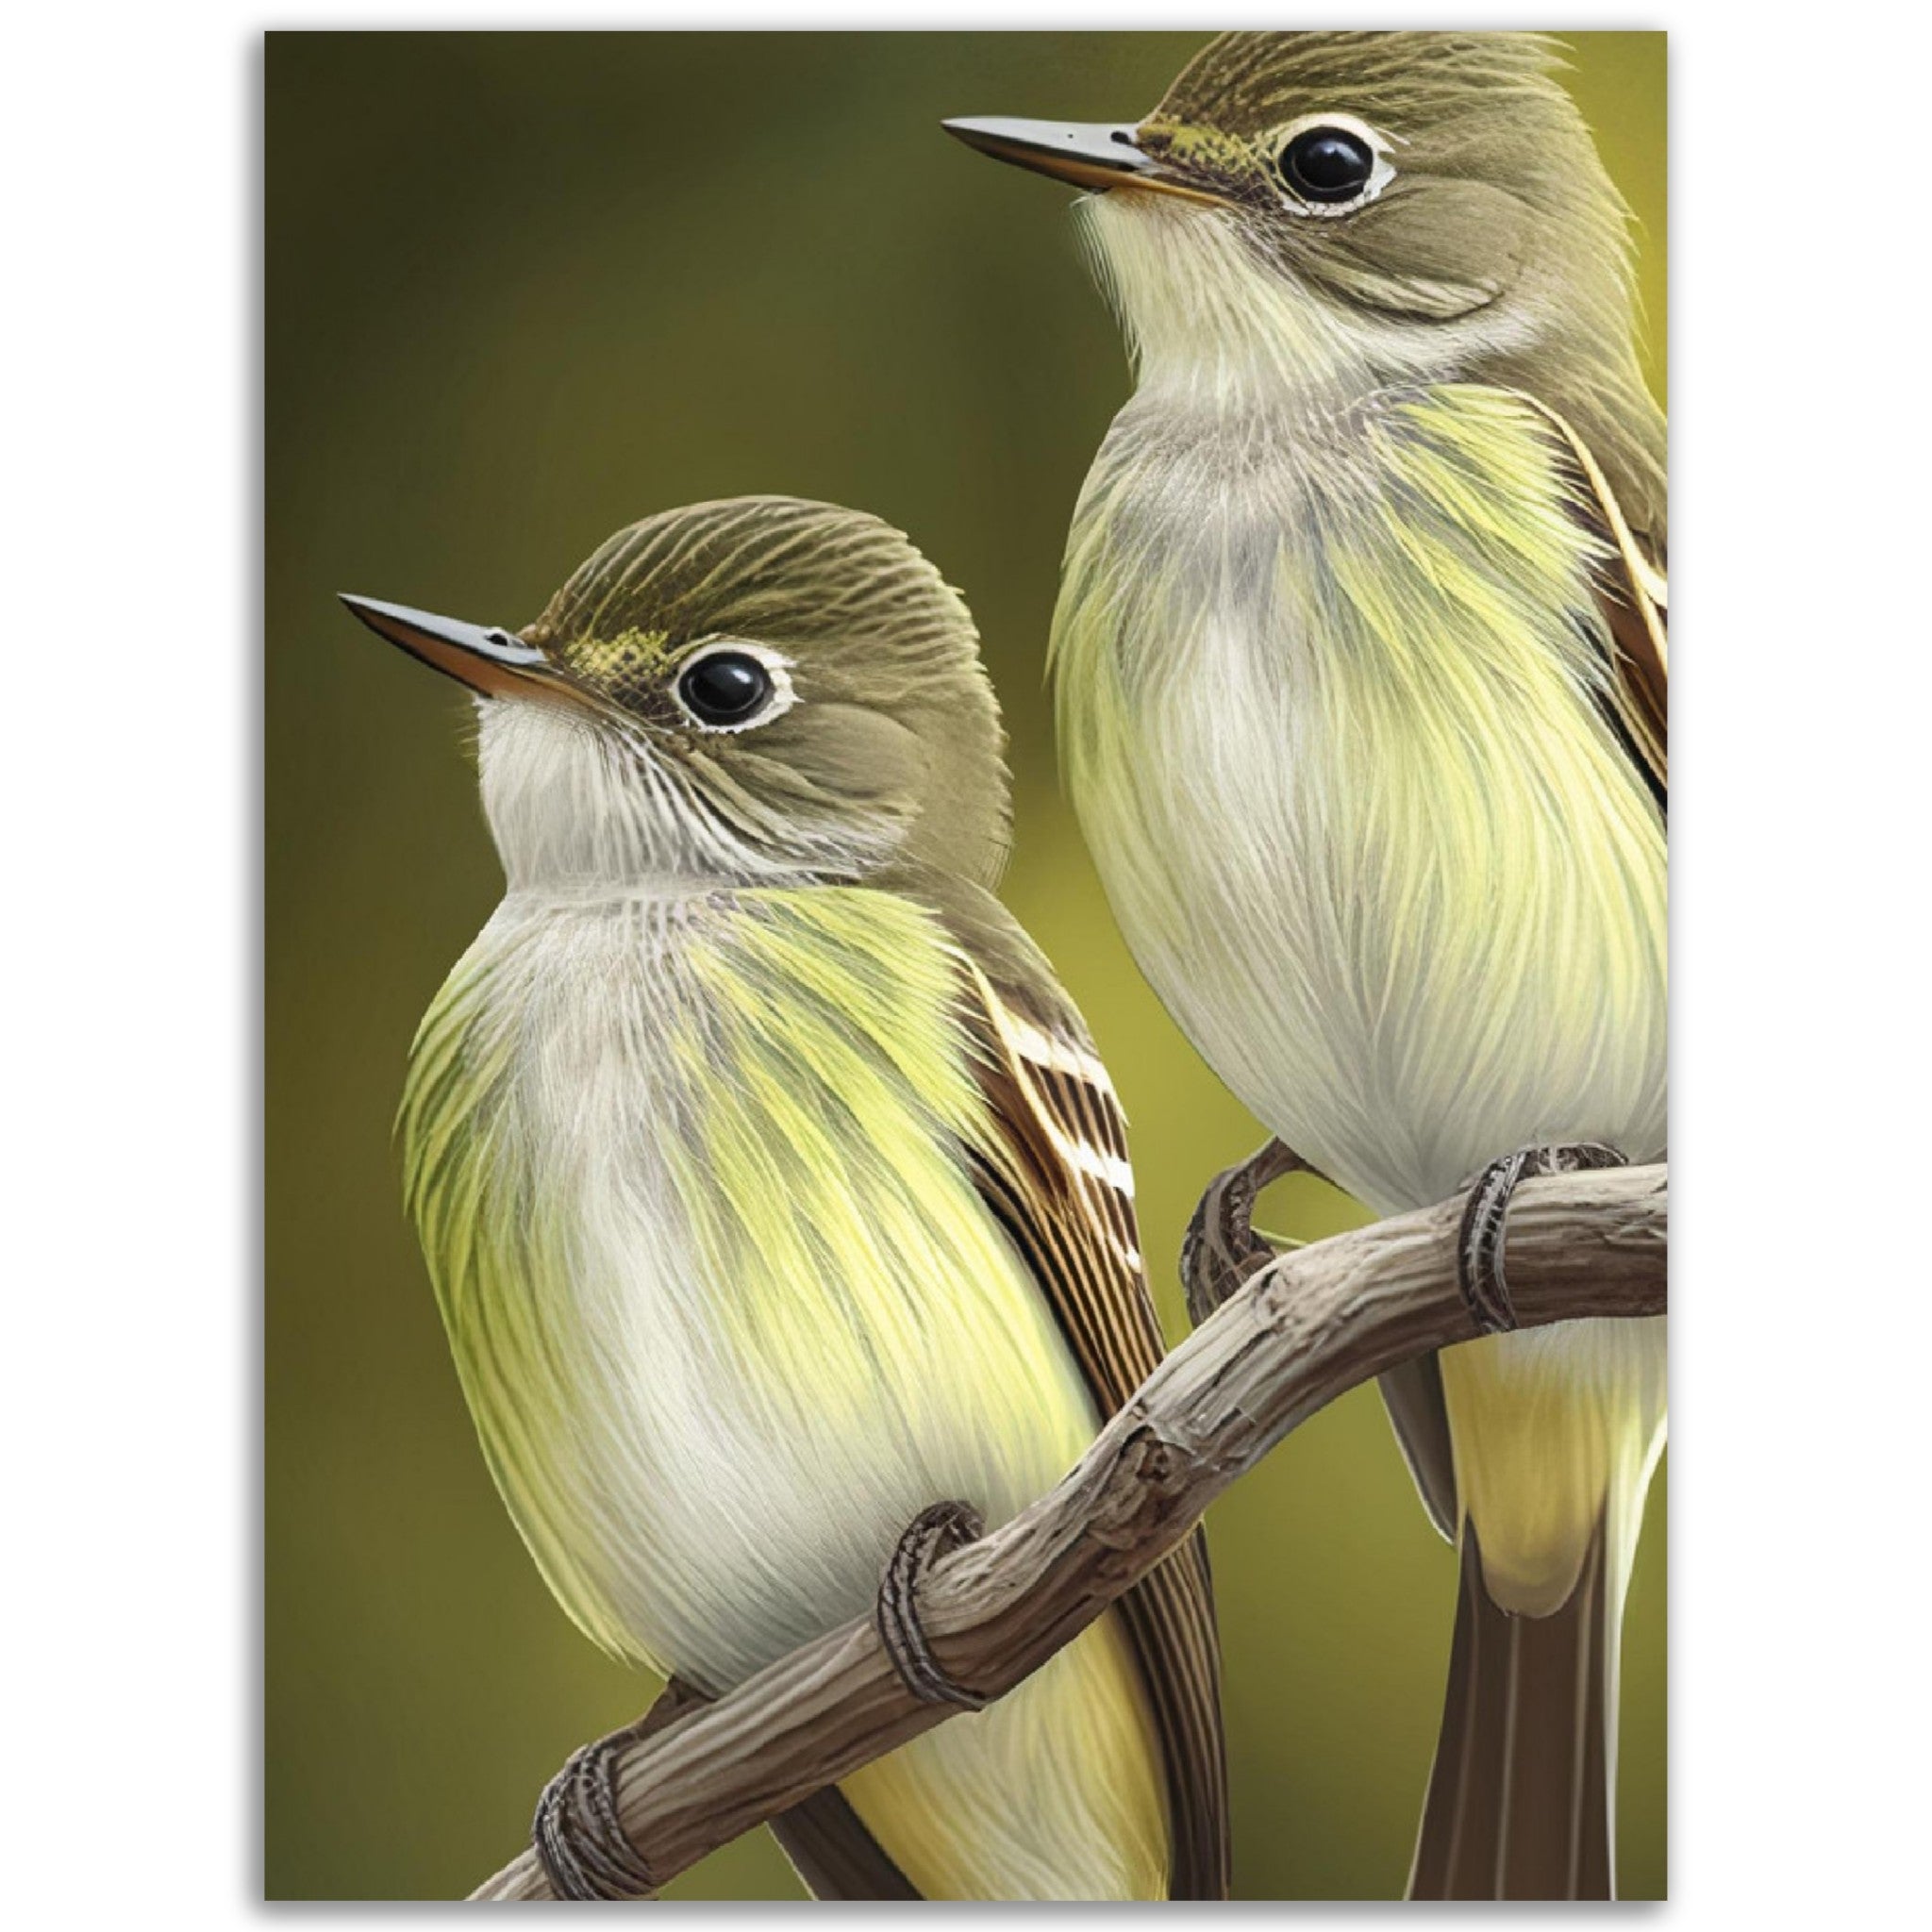 Two Acadian Flycatcher On Canvas - immersiarts